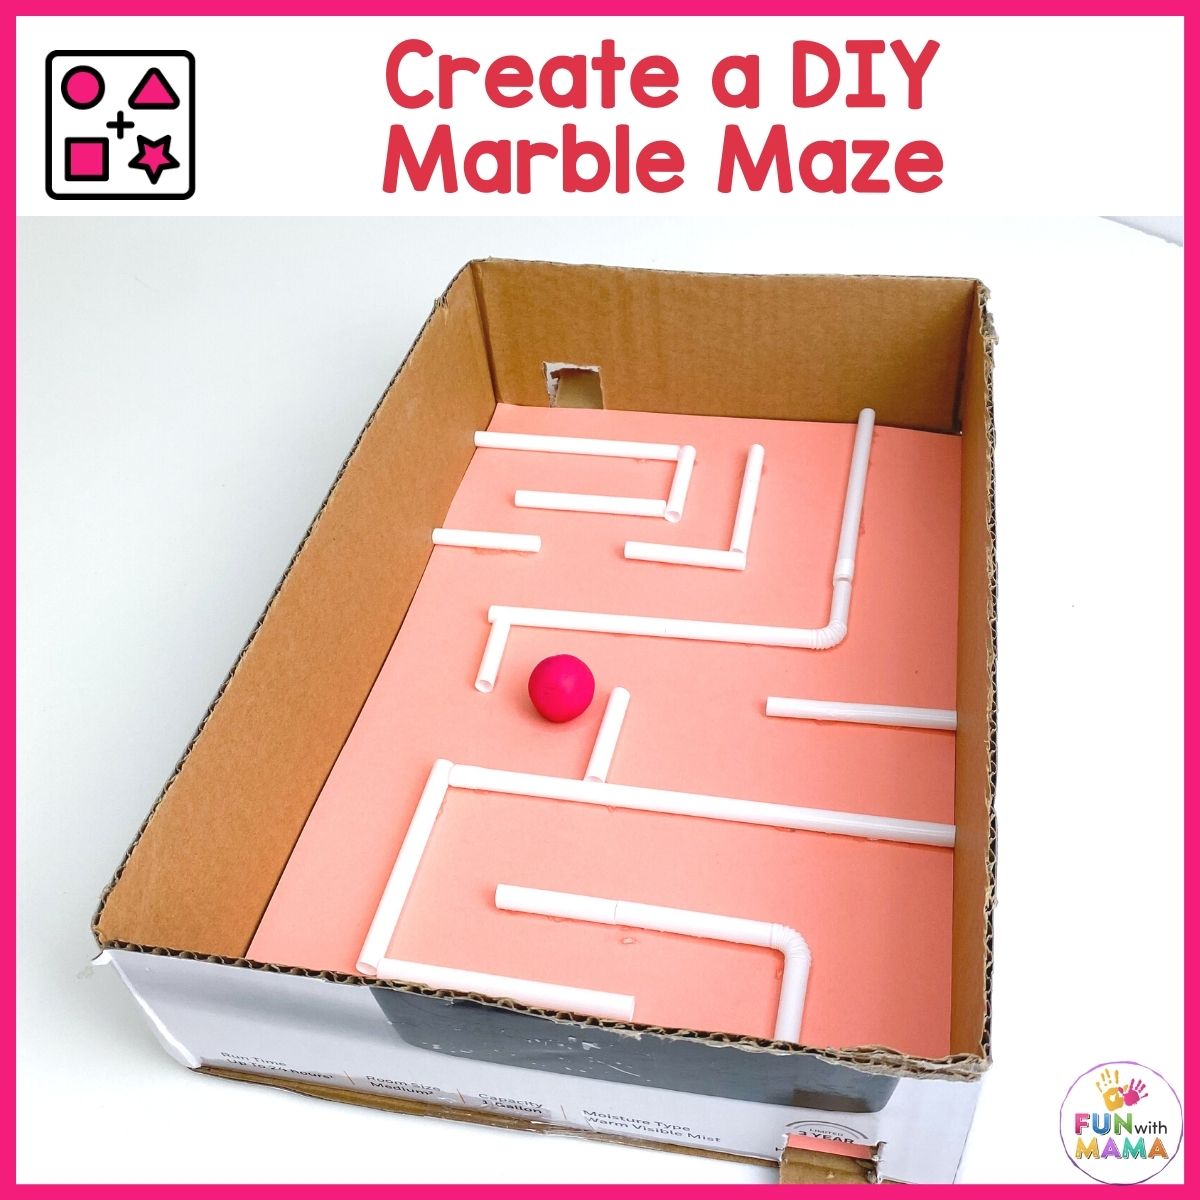 a marble maze using a box, straws and a marble.